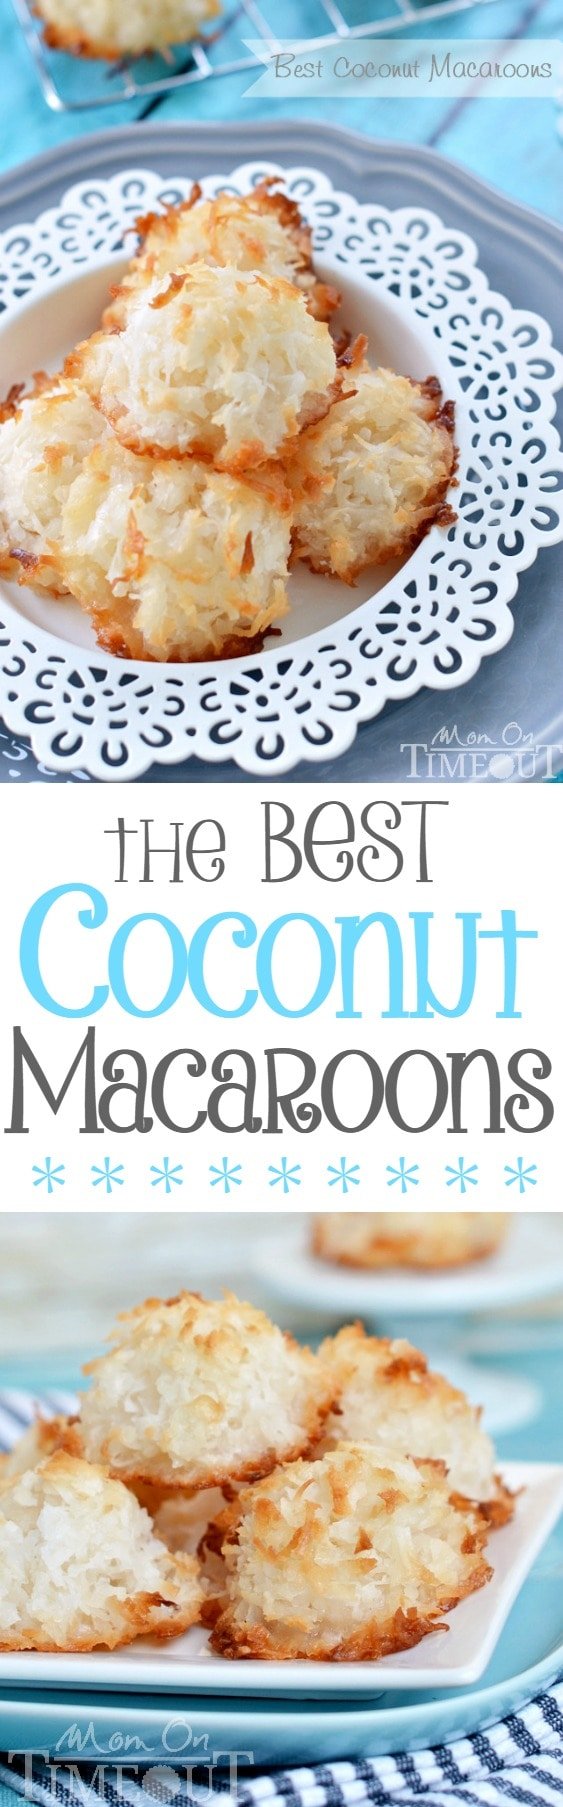 easy-coconut-macaroons-collage